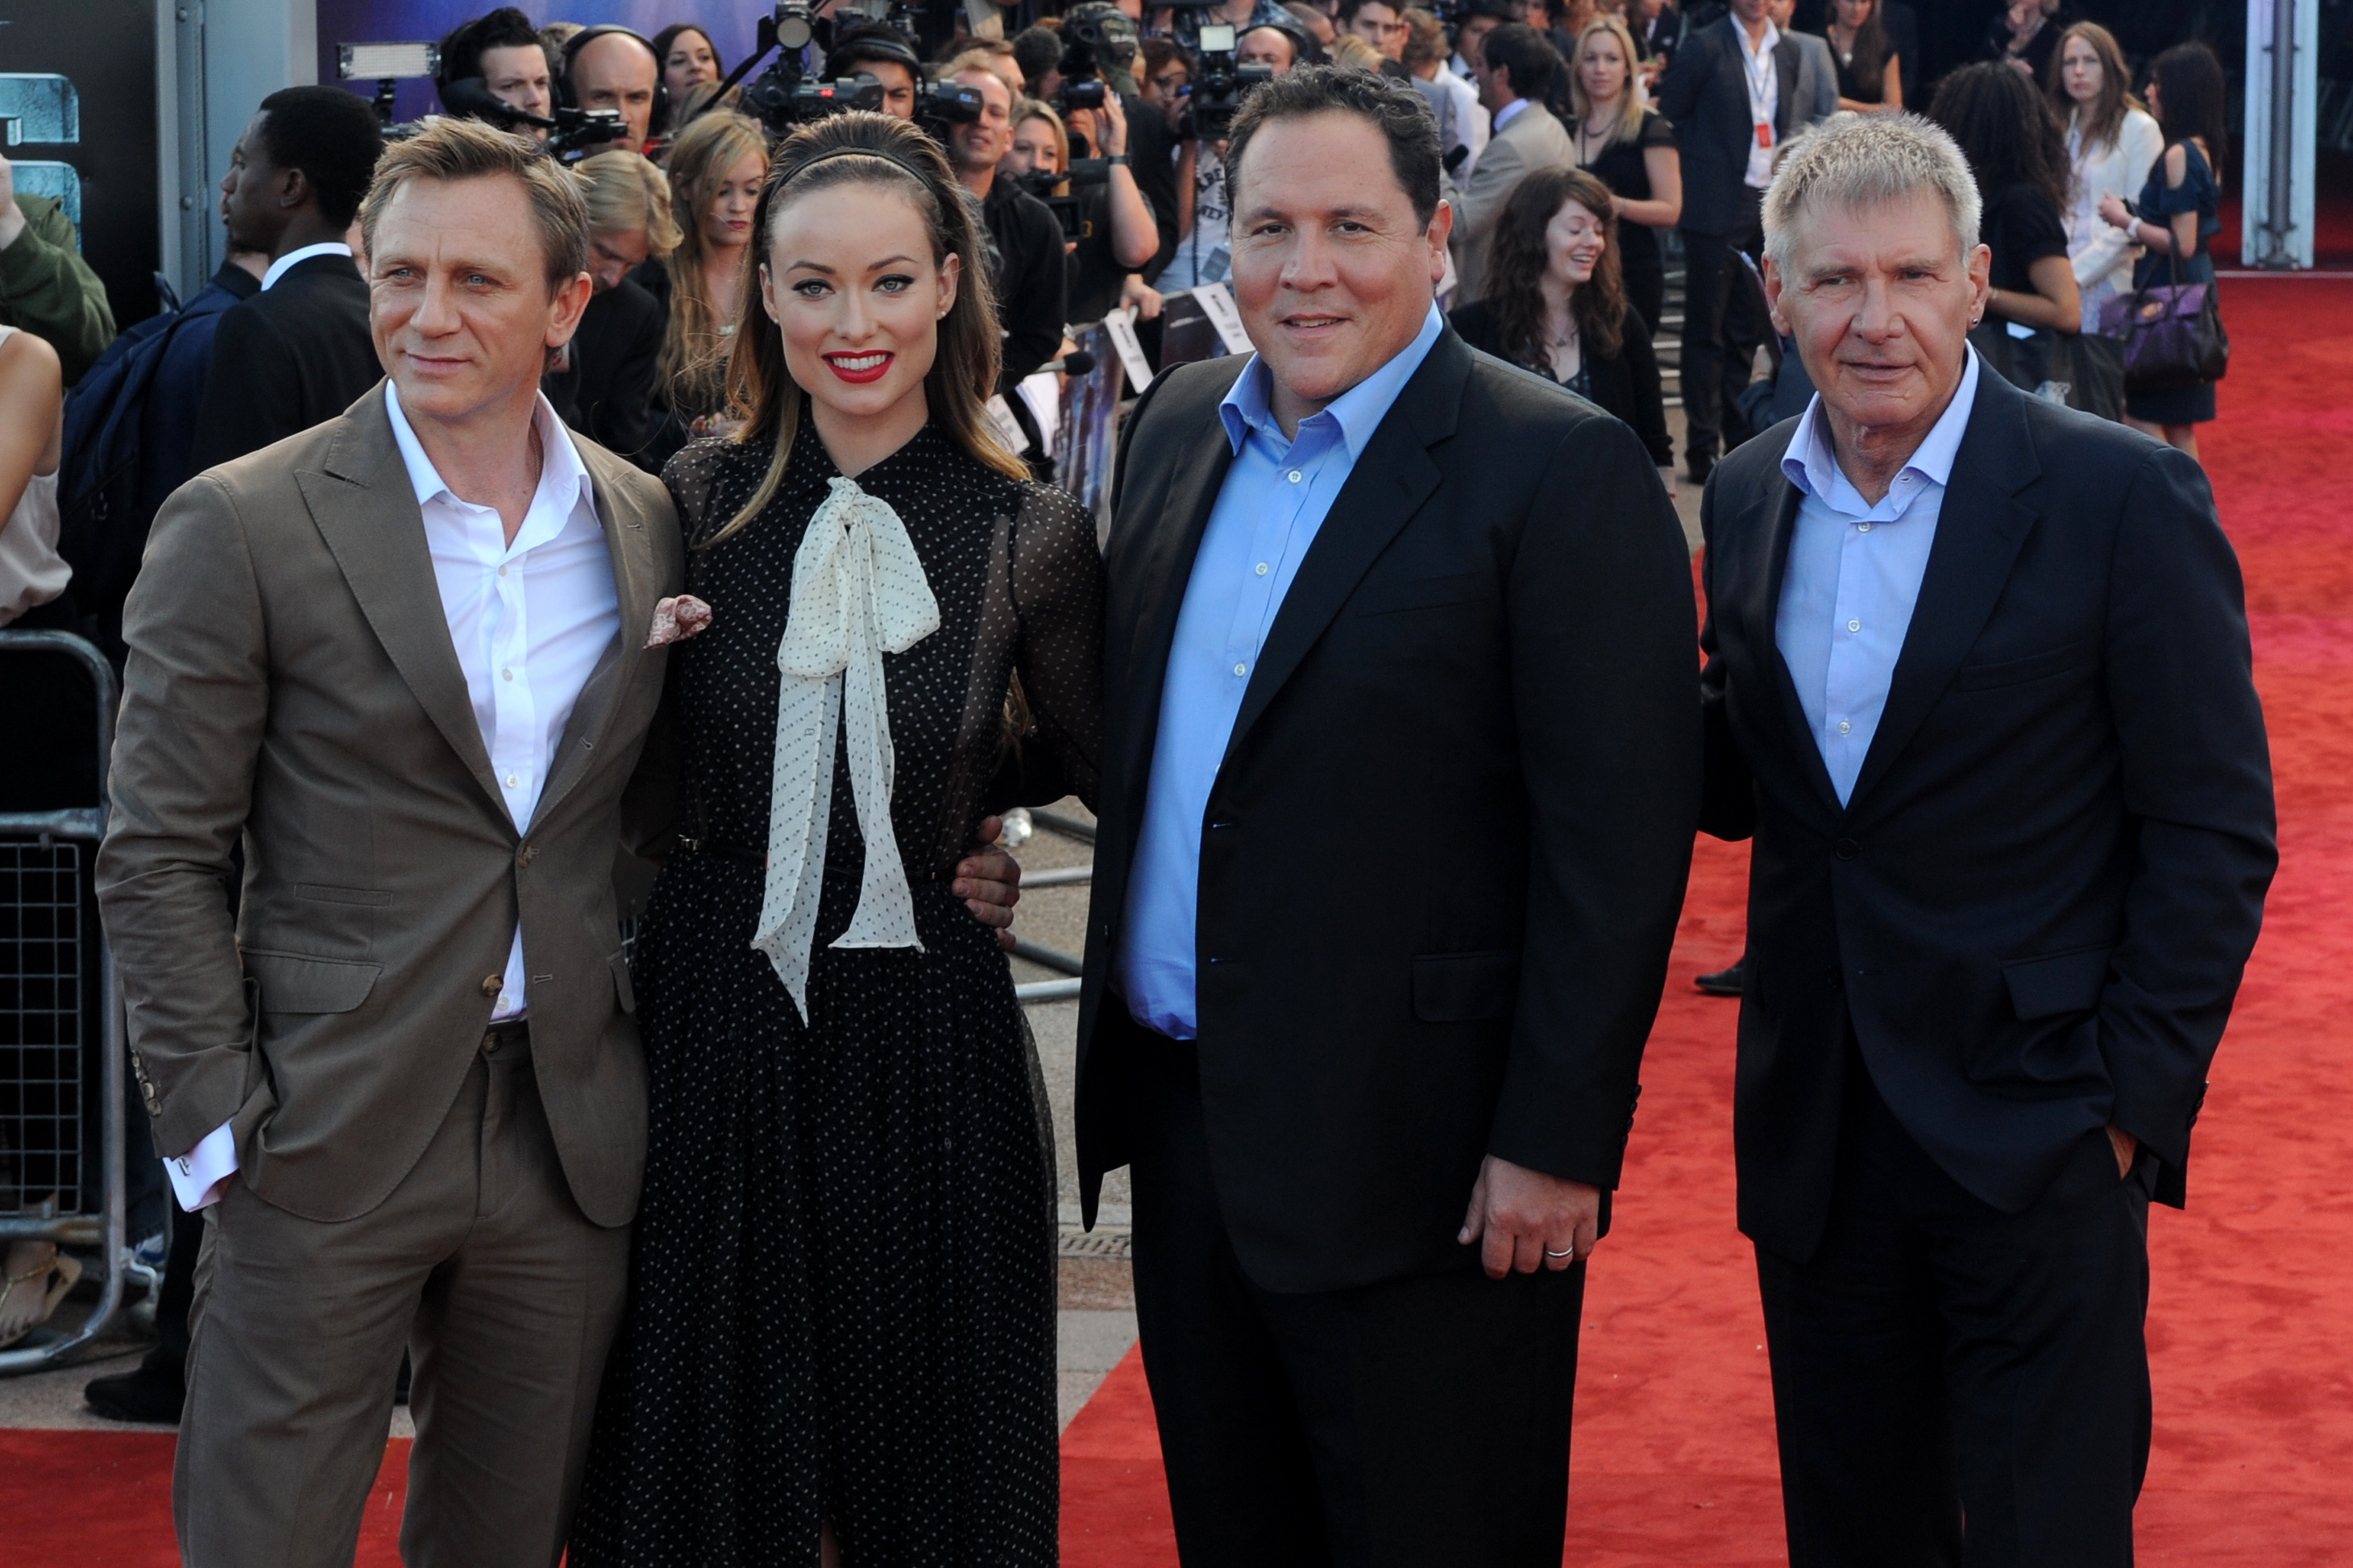 Daniel Craig, Olivia Wilde, Jon Favreau and Harrison Ford attends the Cowboys and Aliens UK Premiere in Cineworld in the O2 Arena on 11th August 2011